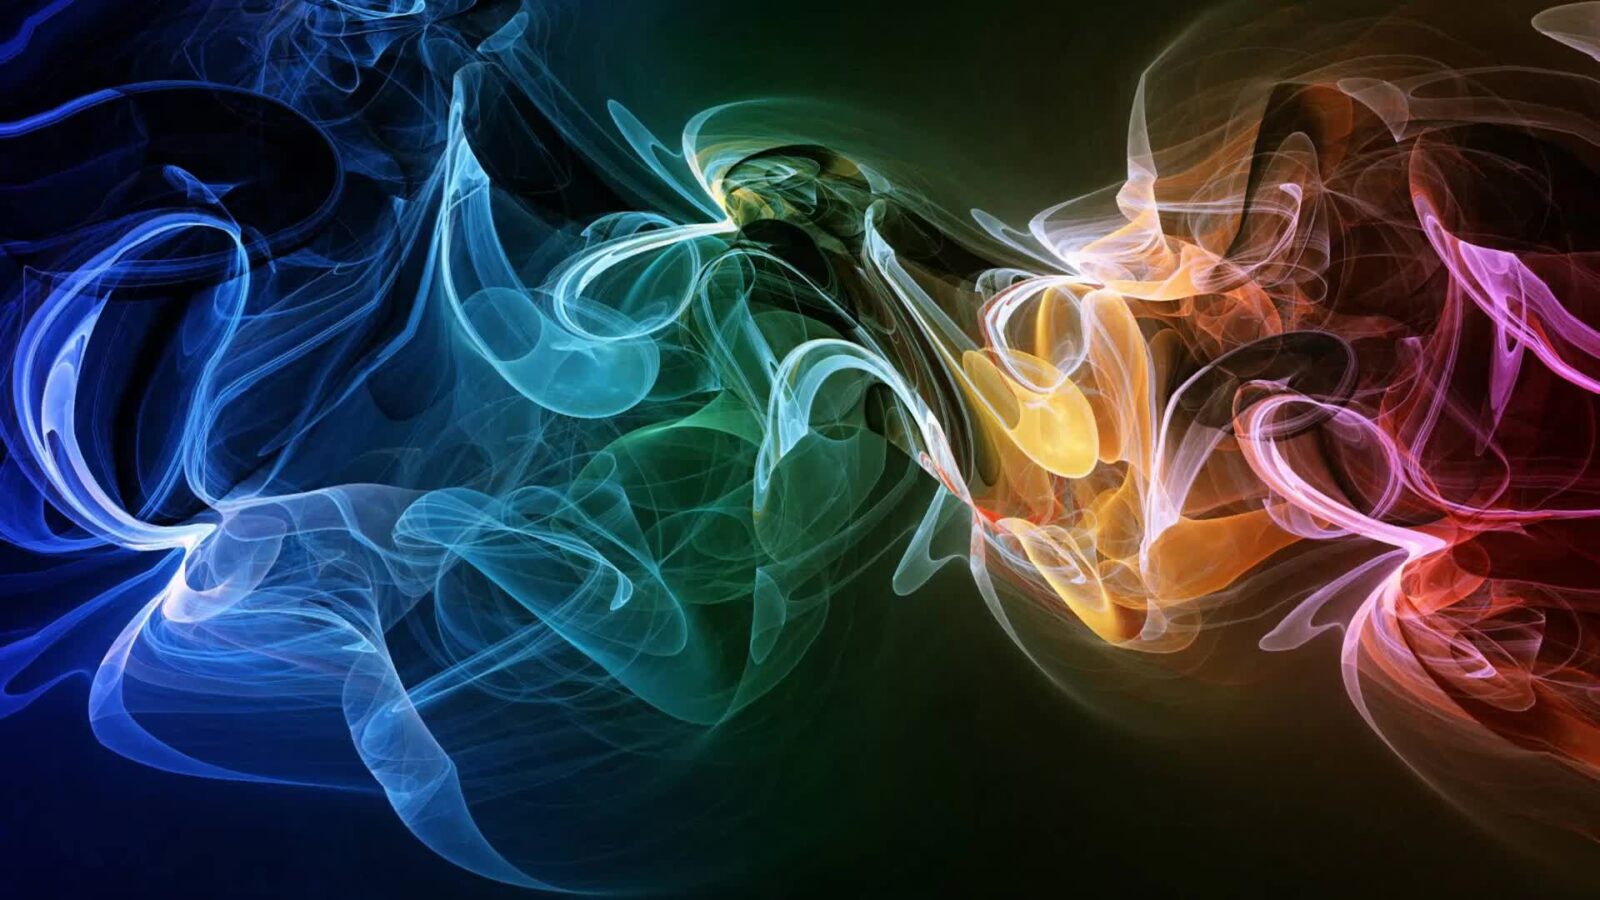 LiveWallpapers4Free.com | Colorful Abstract Smoke - Animated Windows Wallpaper